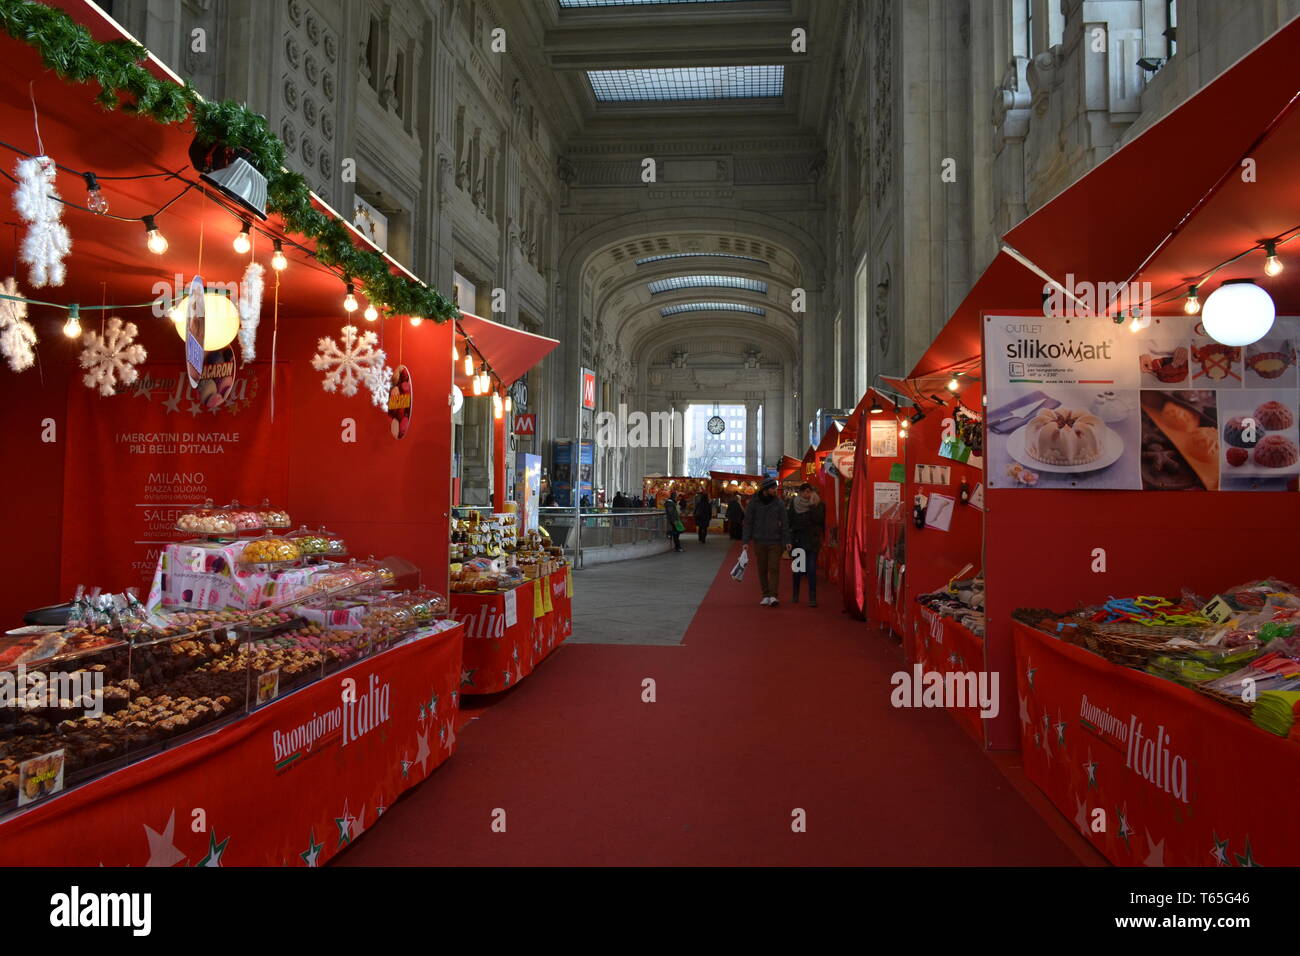 Milan/Italy - January 15, 2014: Traditional Italian Christmas market stalls decorated with the red fabric and red carpet inside the Central station. Stock Photo